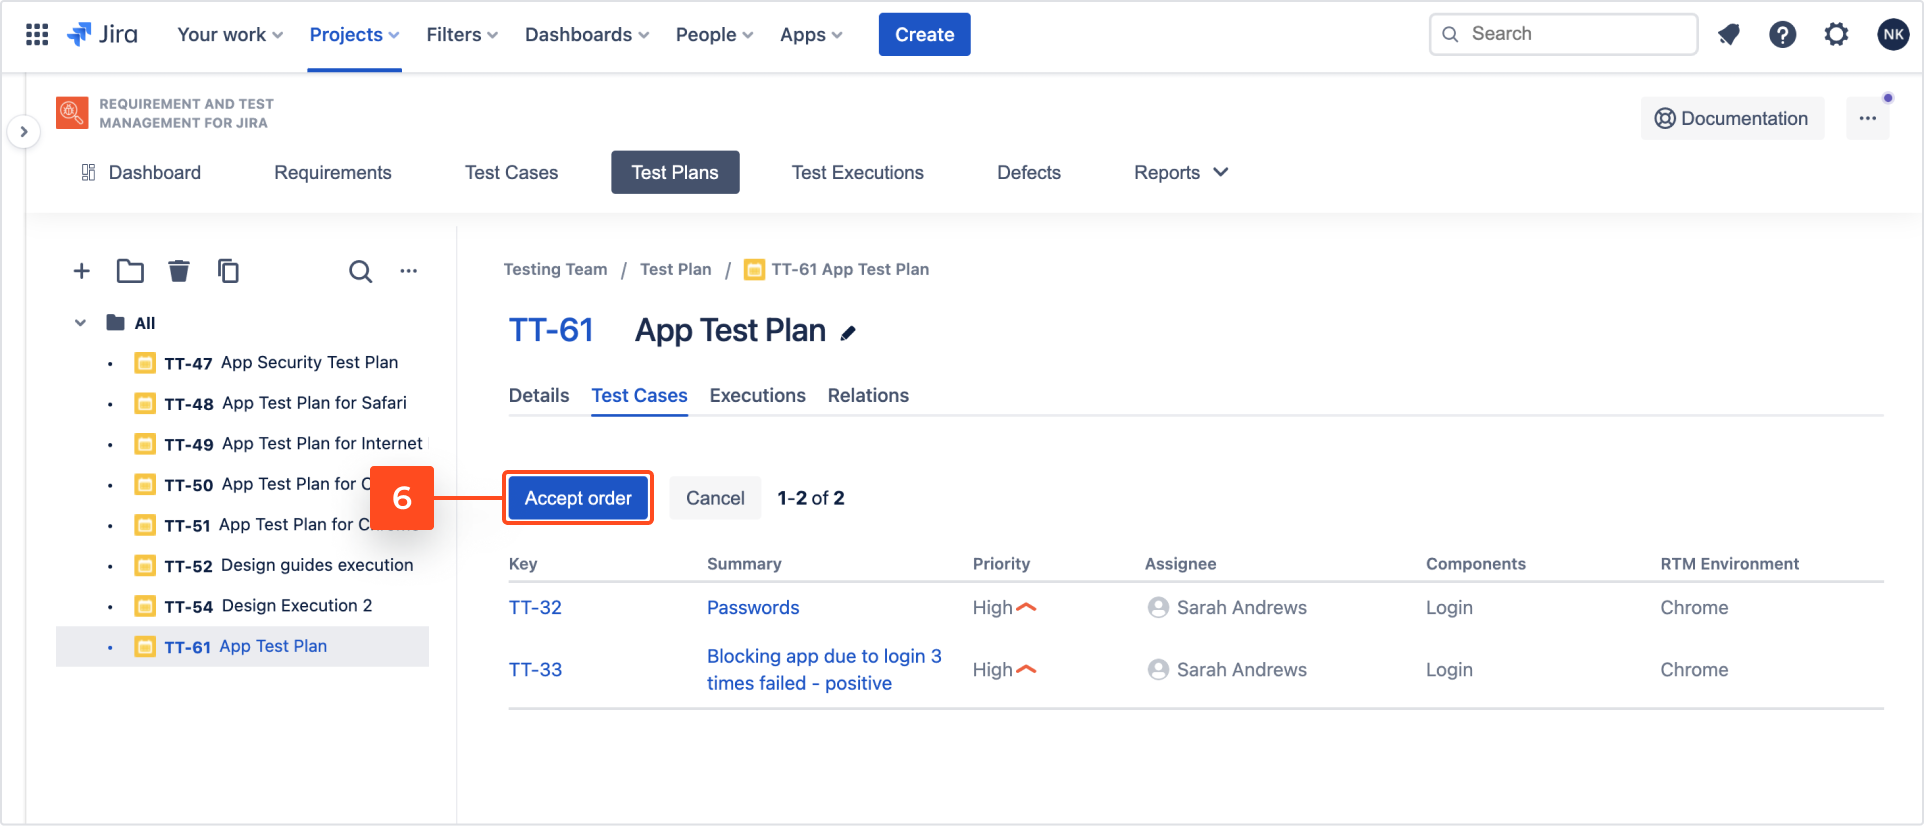 Change order of Test Cases under the Test Plan with Requirements and Test Management for Jira app